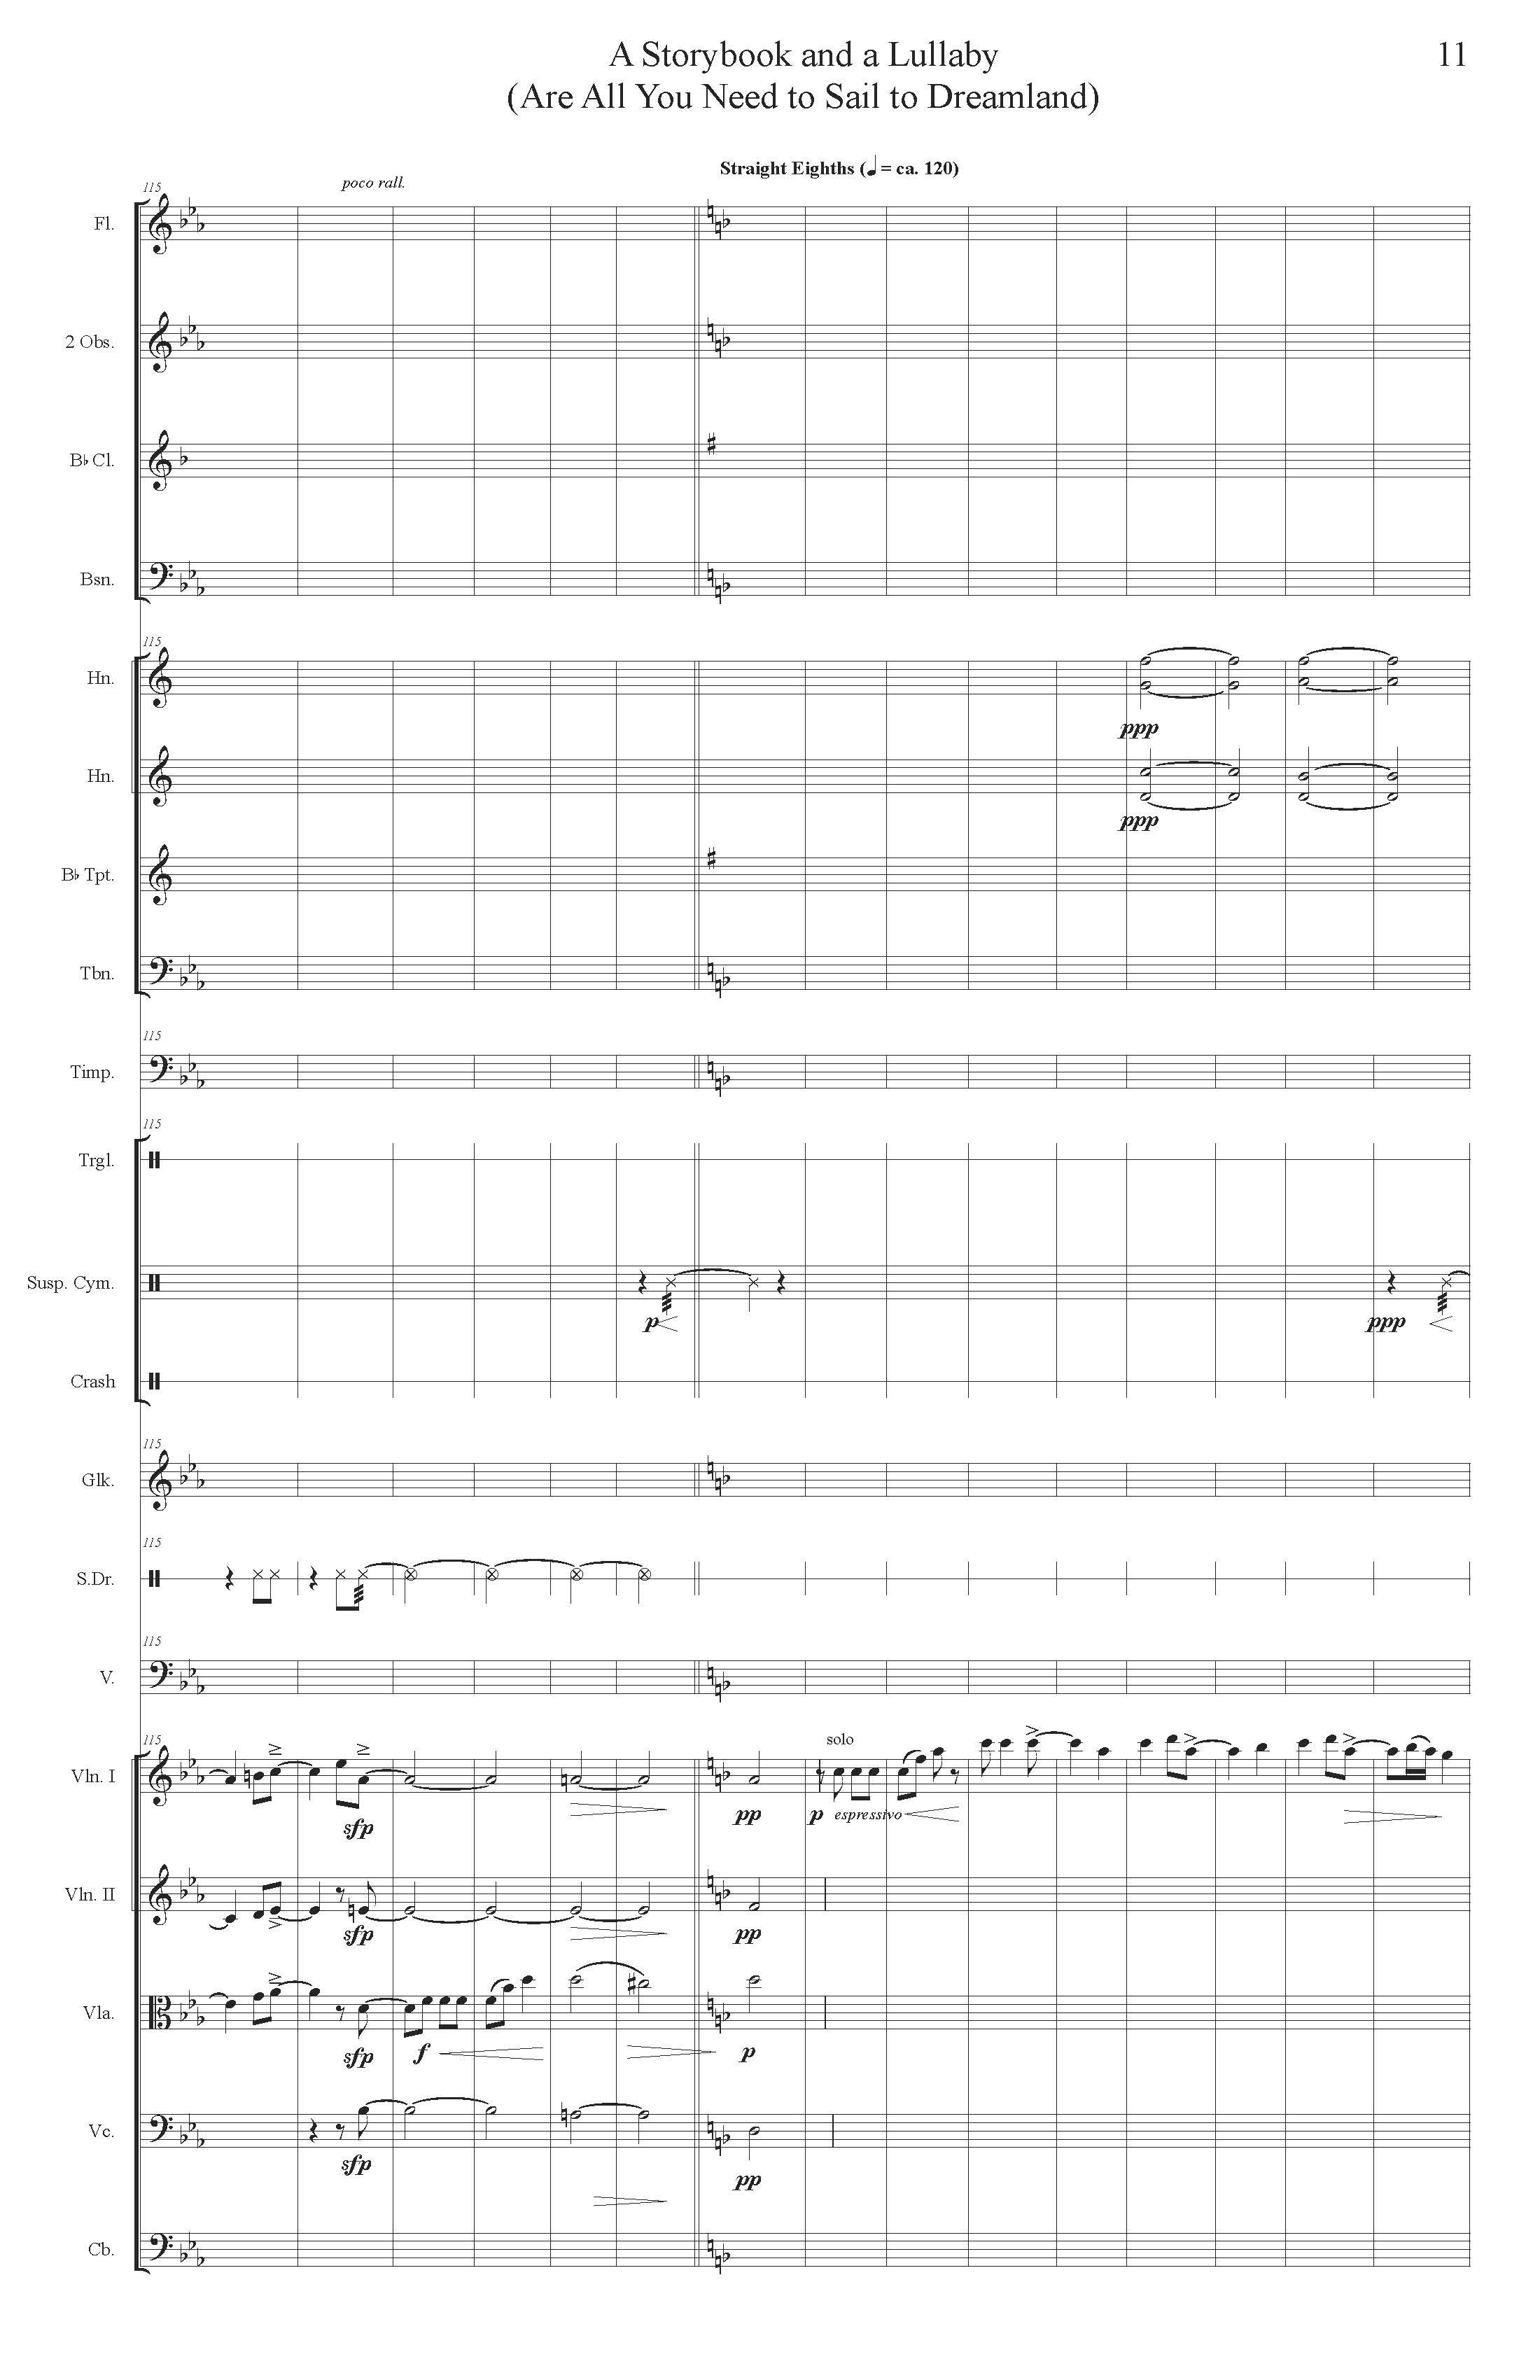 A STORYBOOK AND A LULLABY ORCH - Score_Page_11.jpg